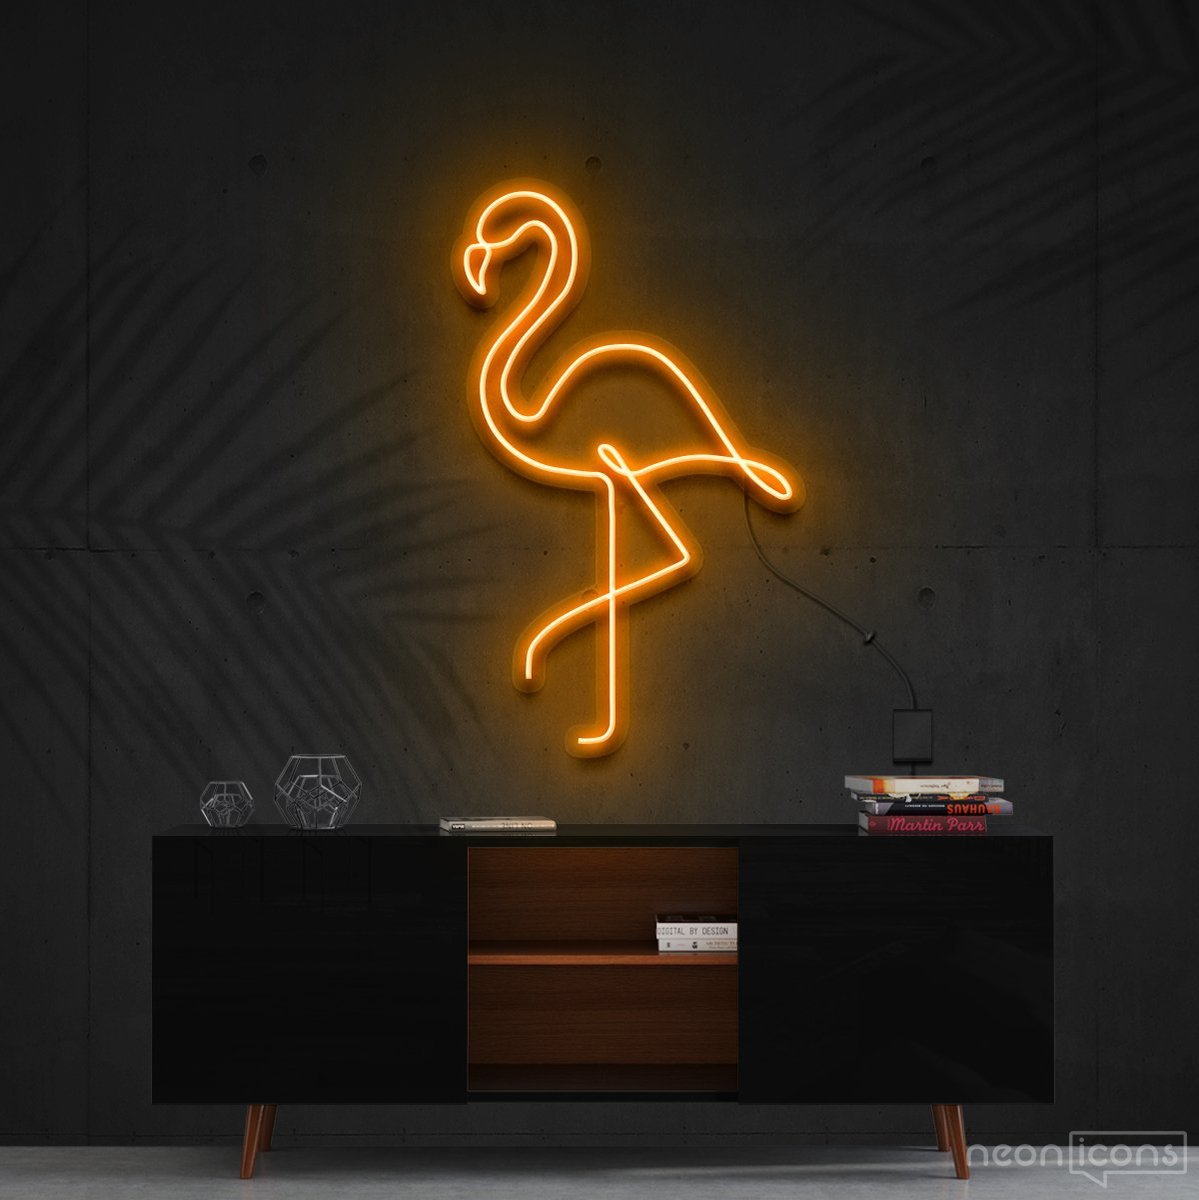 "Flamingo" Neon Sign 60cm (2ft) / Orange / Cut to Shape by Neon Icons